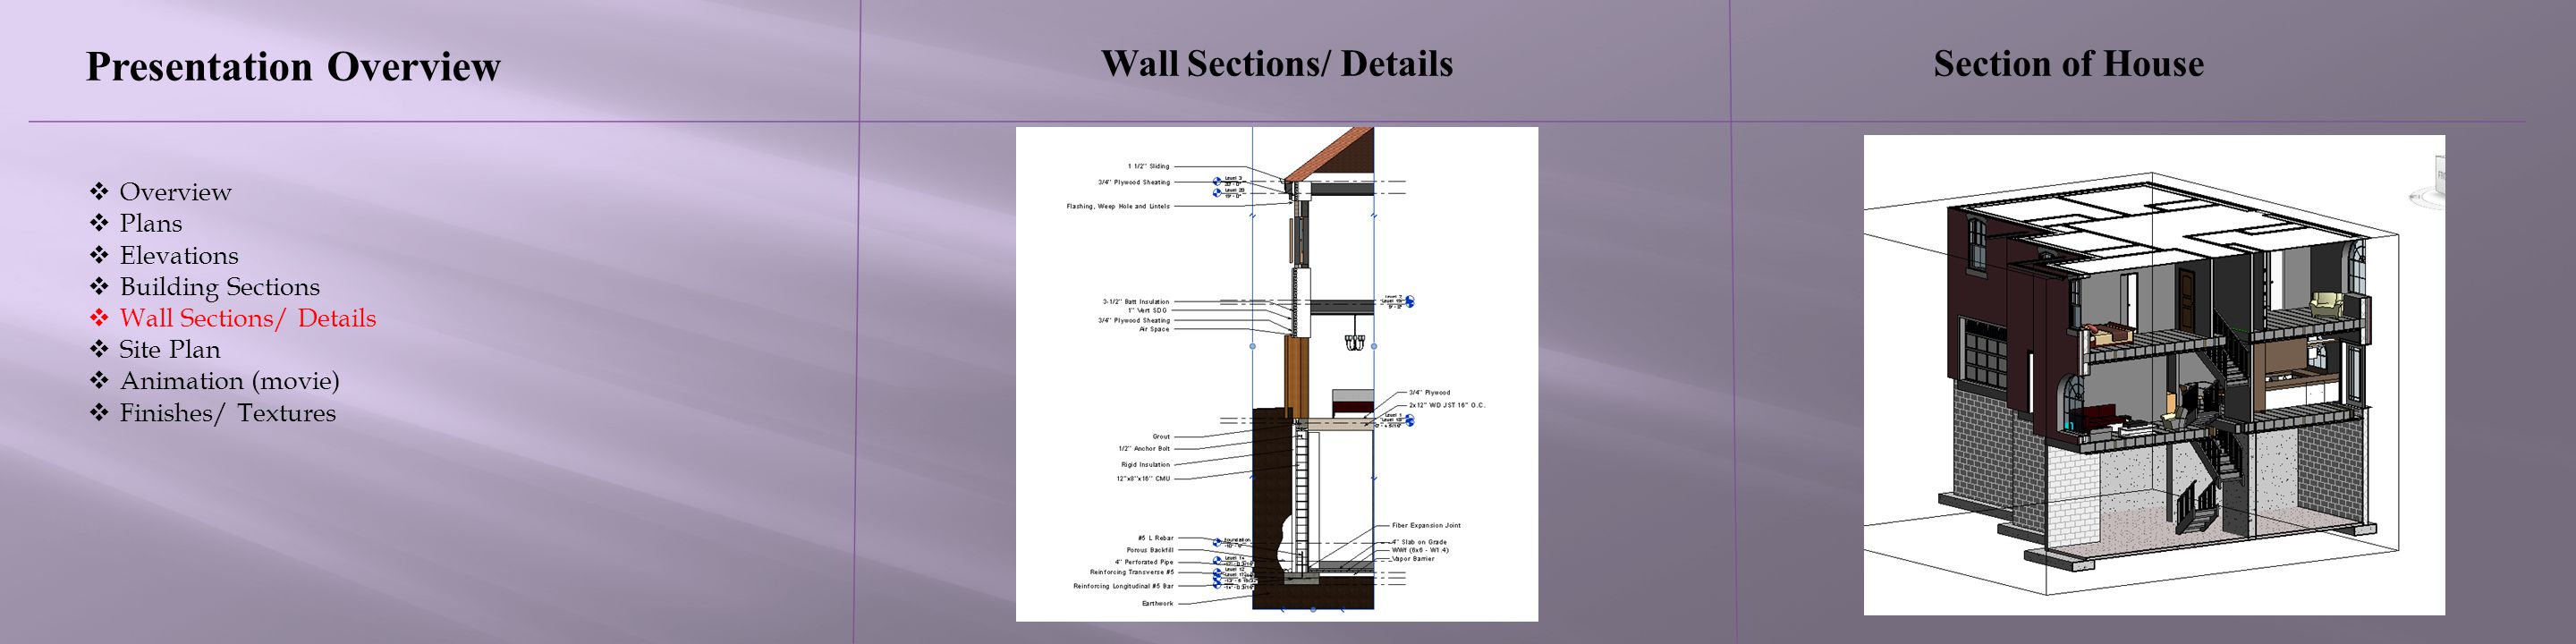 Wall Sections/ Details